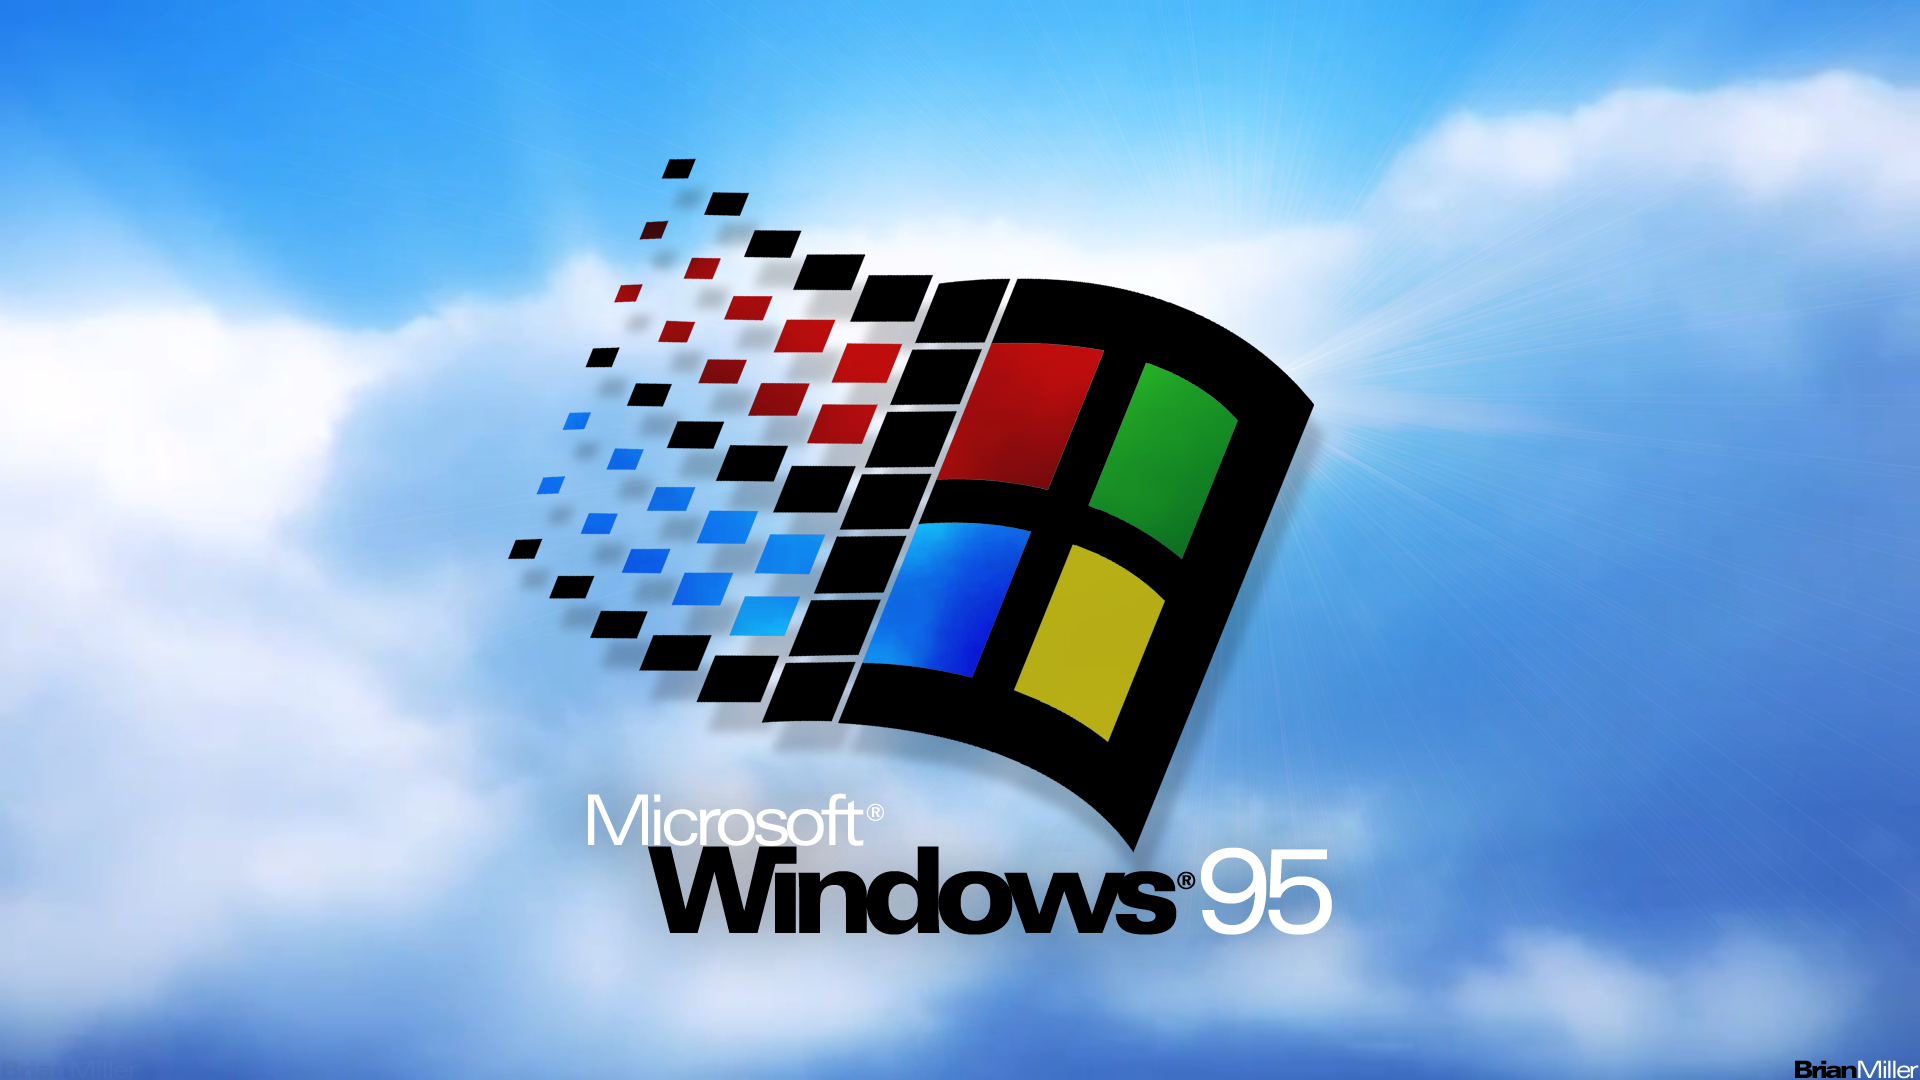 Windows 95 Widescreen Wallpaper - OS Customization, Tips and other